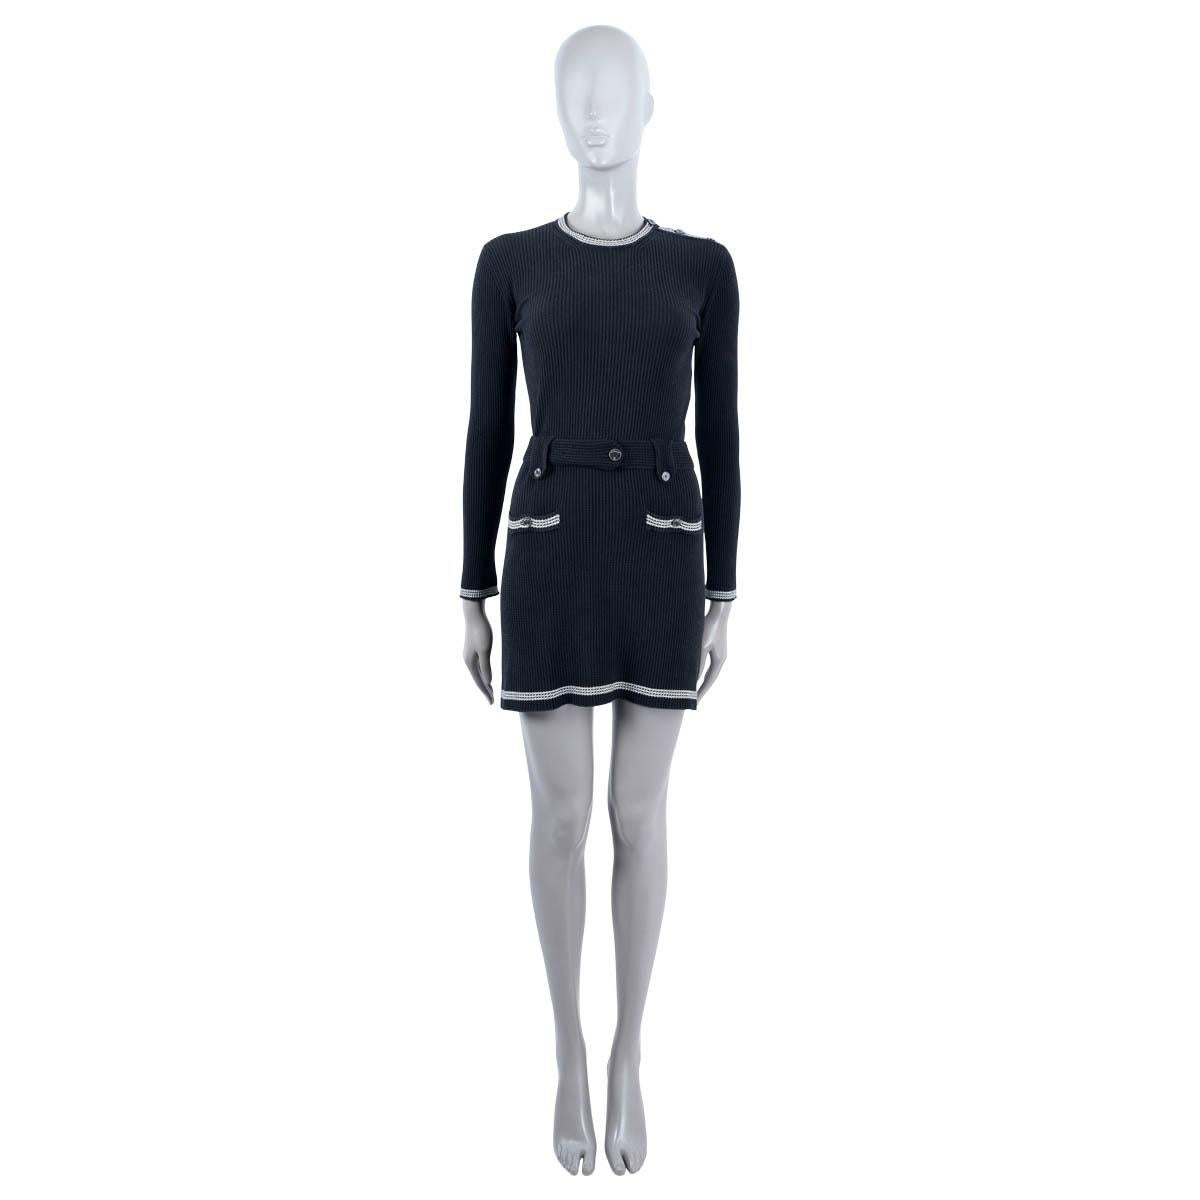 100% authentic Chanel rib-knit dress in black silk (78%), polyamide (17%) and elastane (5%). Features contrast ivory striped trims, a crew neck, two buttons pockets, belt loop and matching fabric belt. Opens wit three buttons at the neck. Unlined.